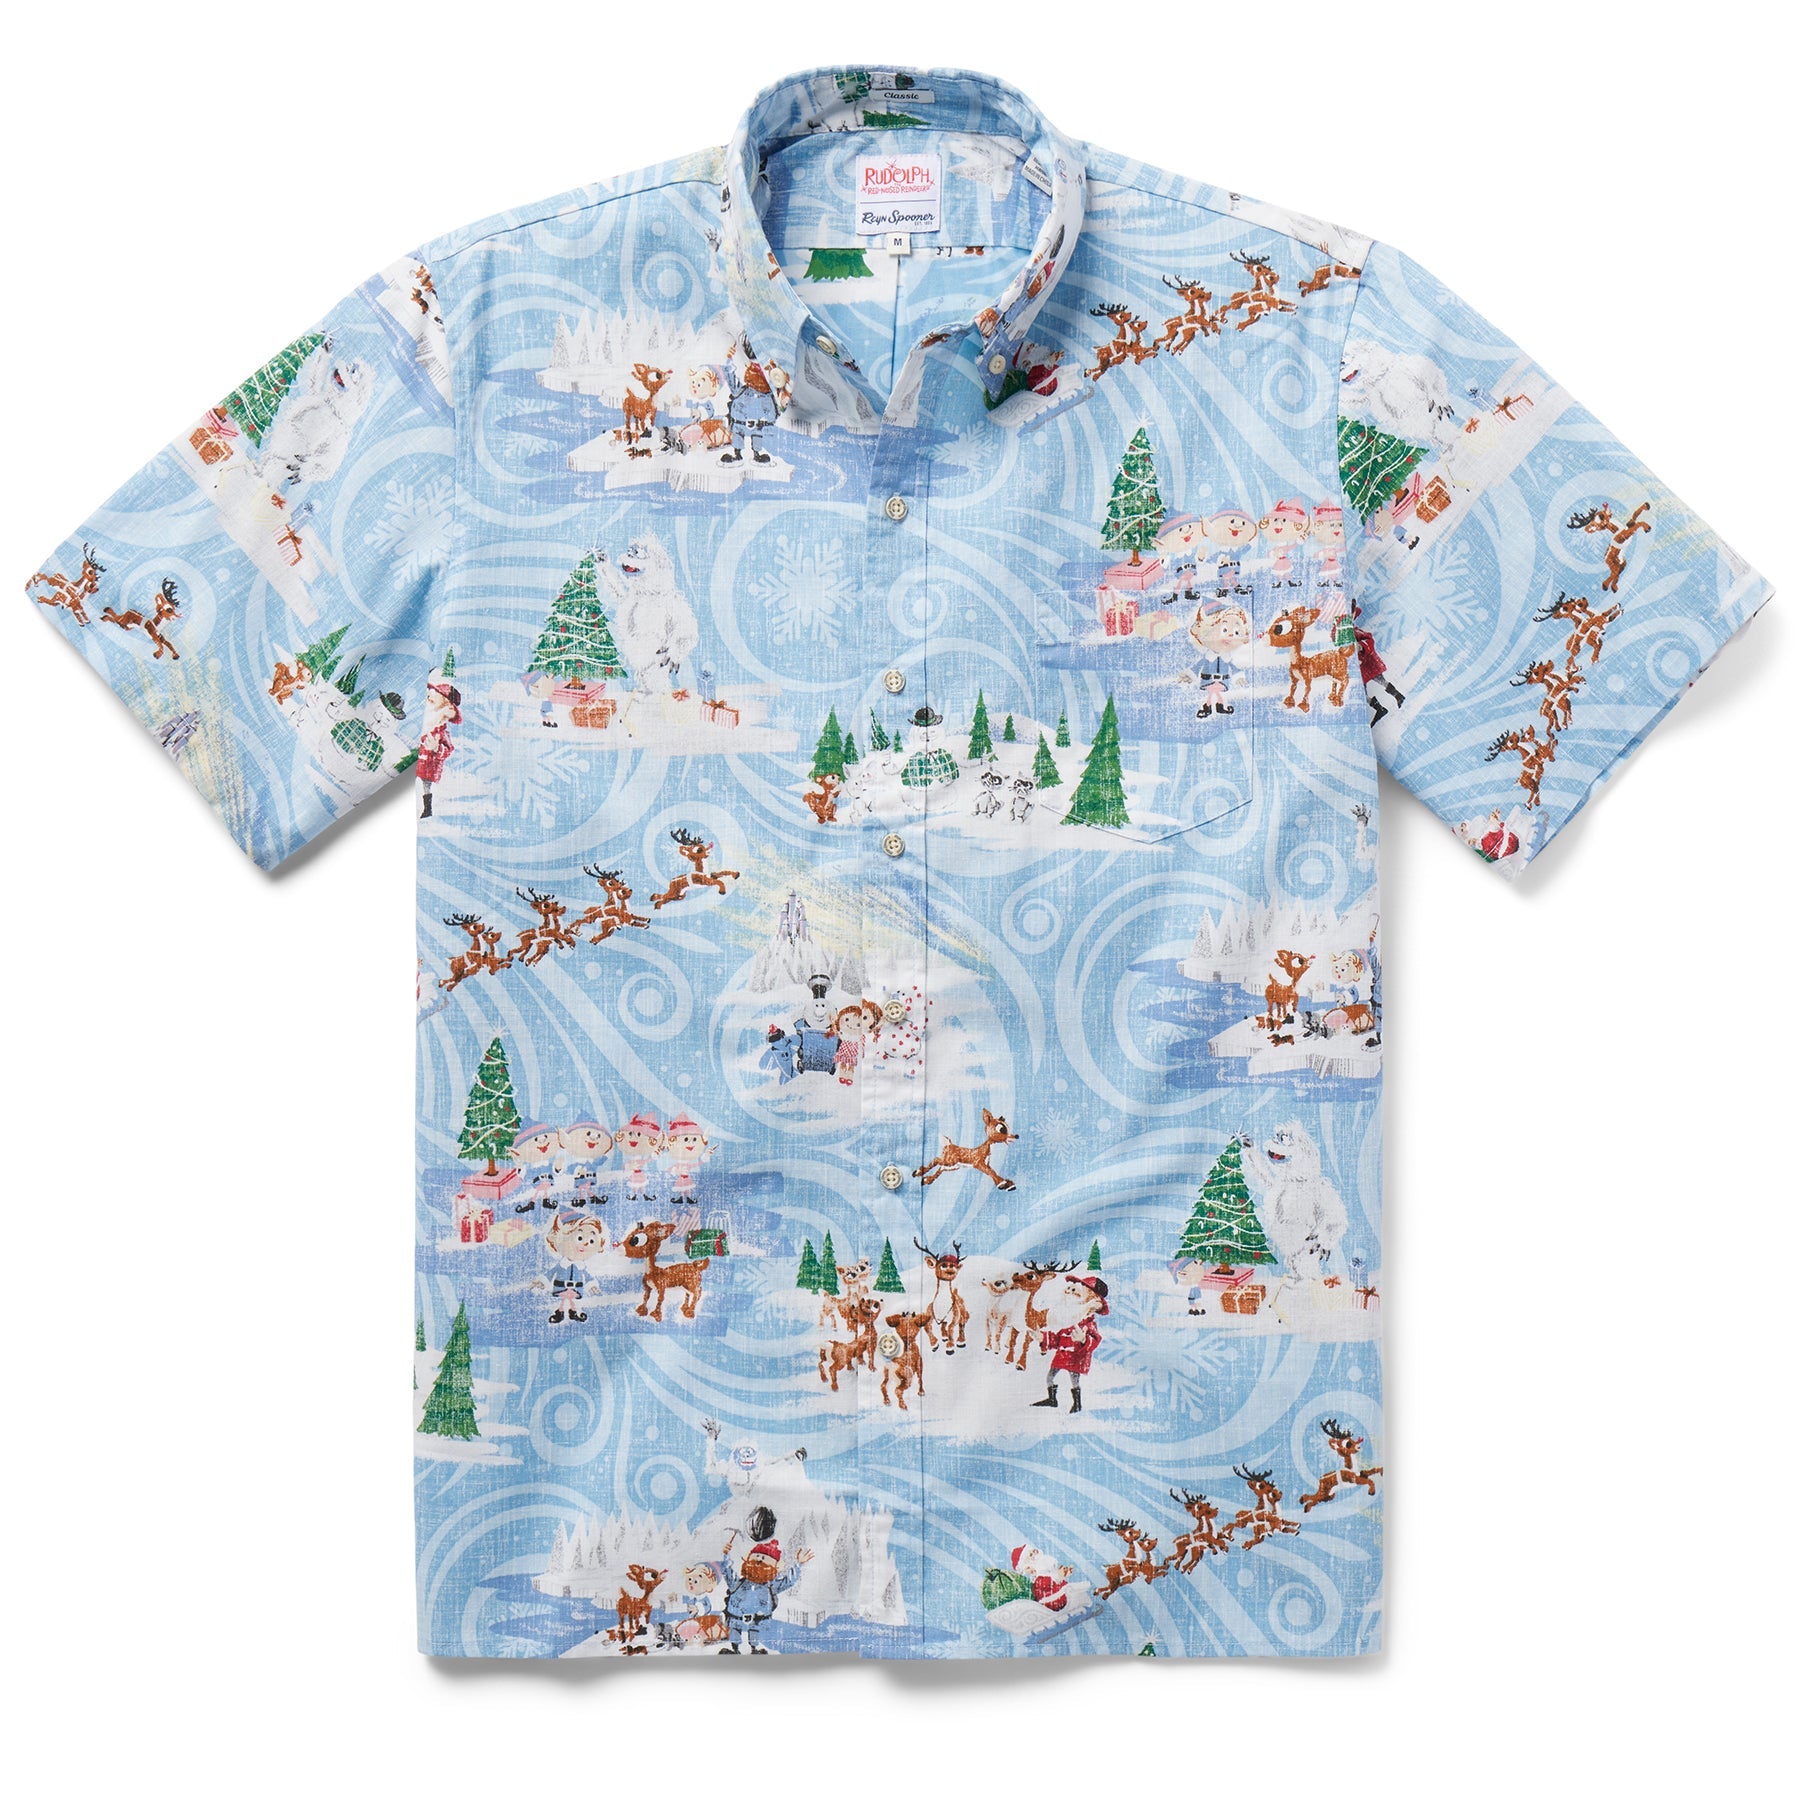 Reyn Spooner Rudolph the Red-Nosed Reindeer Camp Shirt Holiday Blue S  805766237765